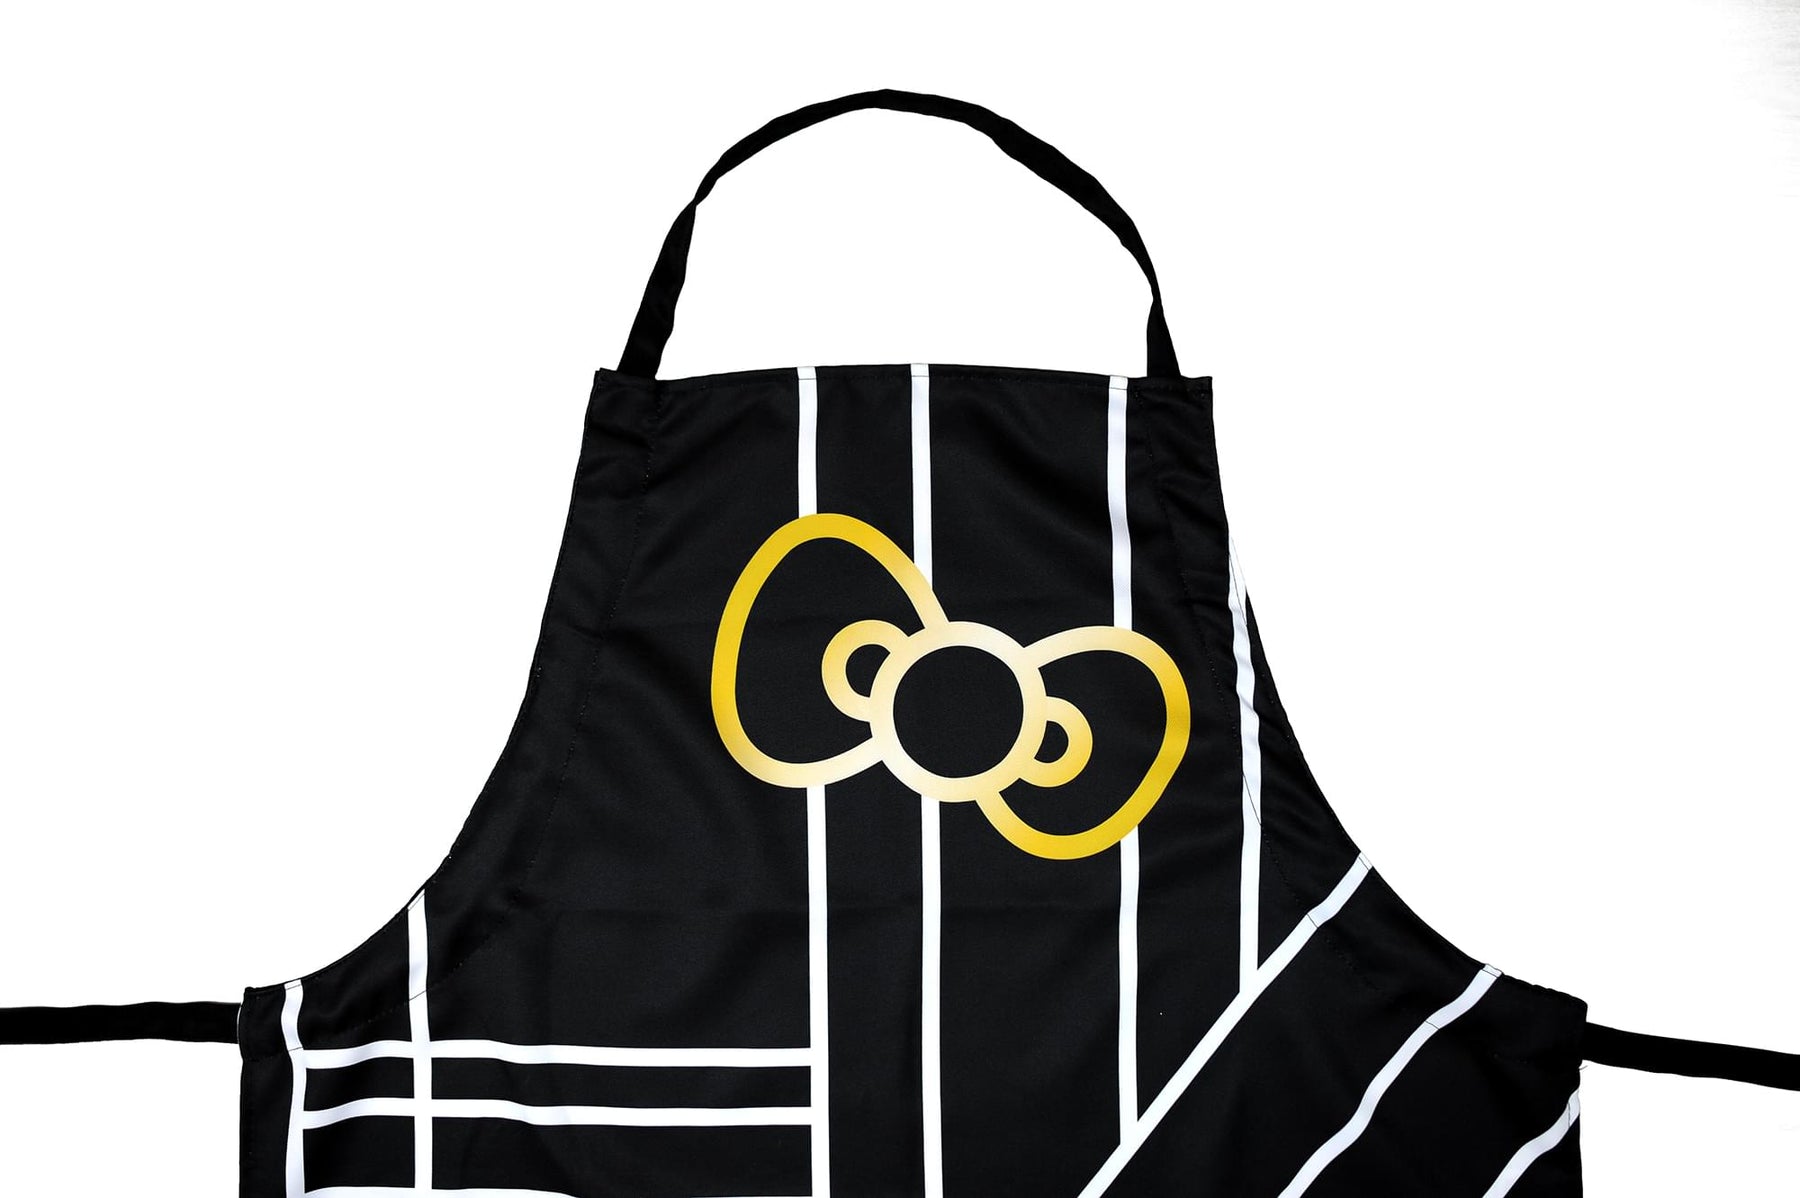 Hello Kitty Pinache Black and Gold Adult Kitchen Apron